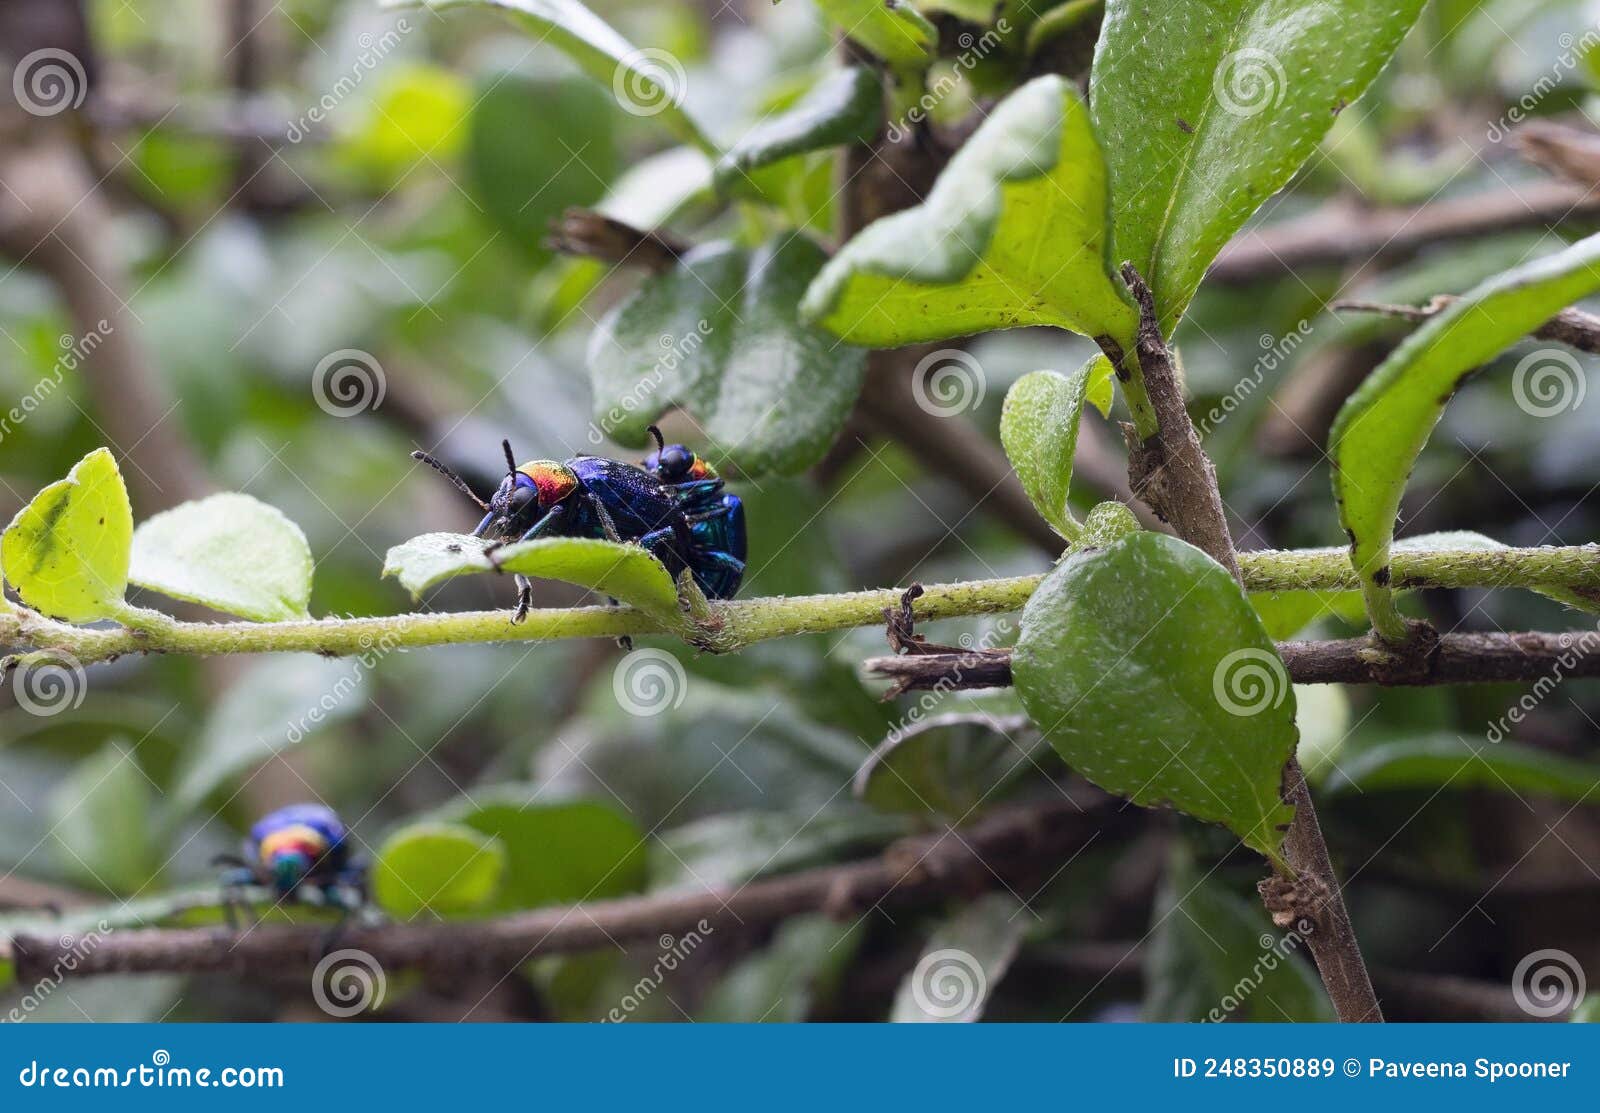 Blue Milkweed Beetle Has Blue Wings In Nature Background Stock Image Image Of Colorful Mating